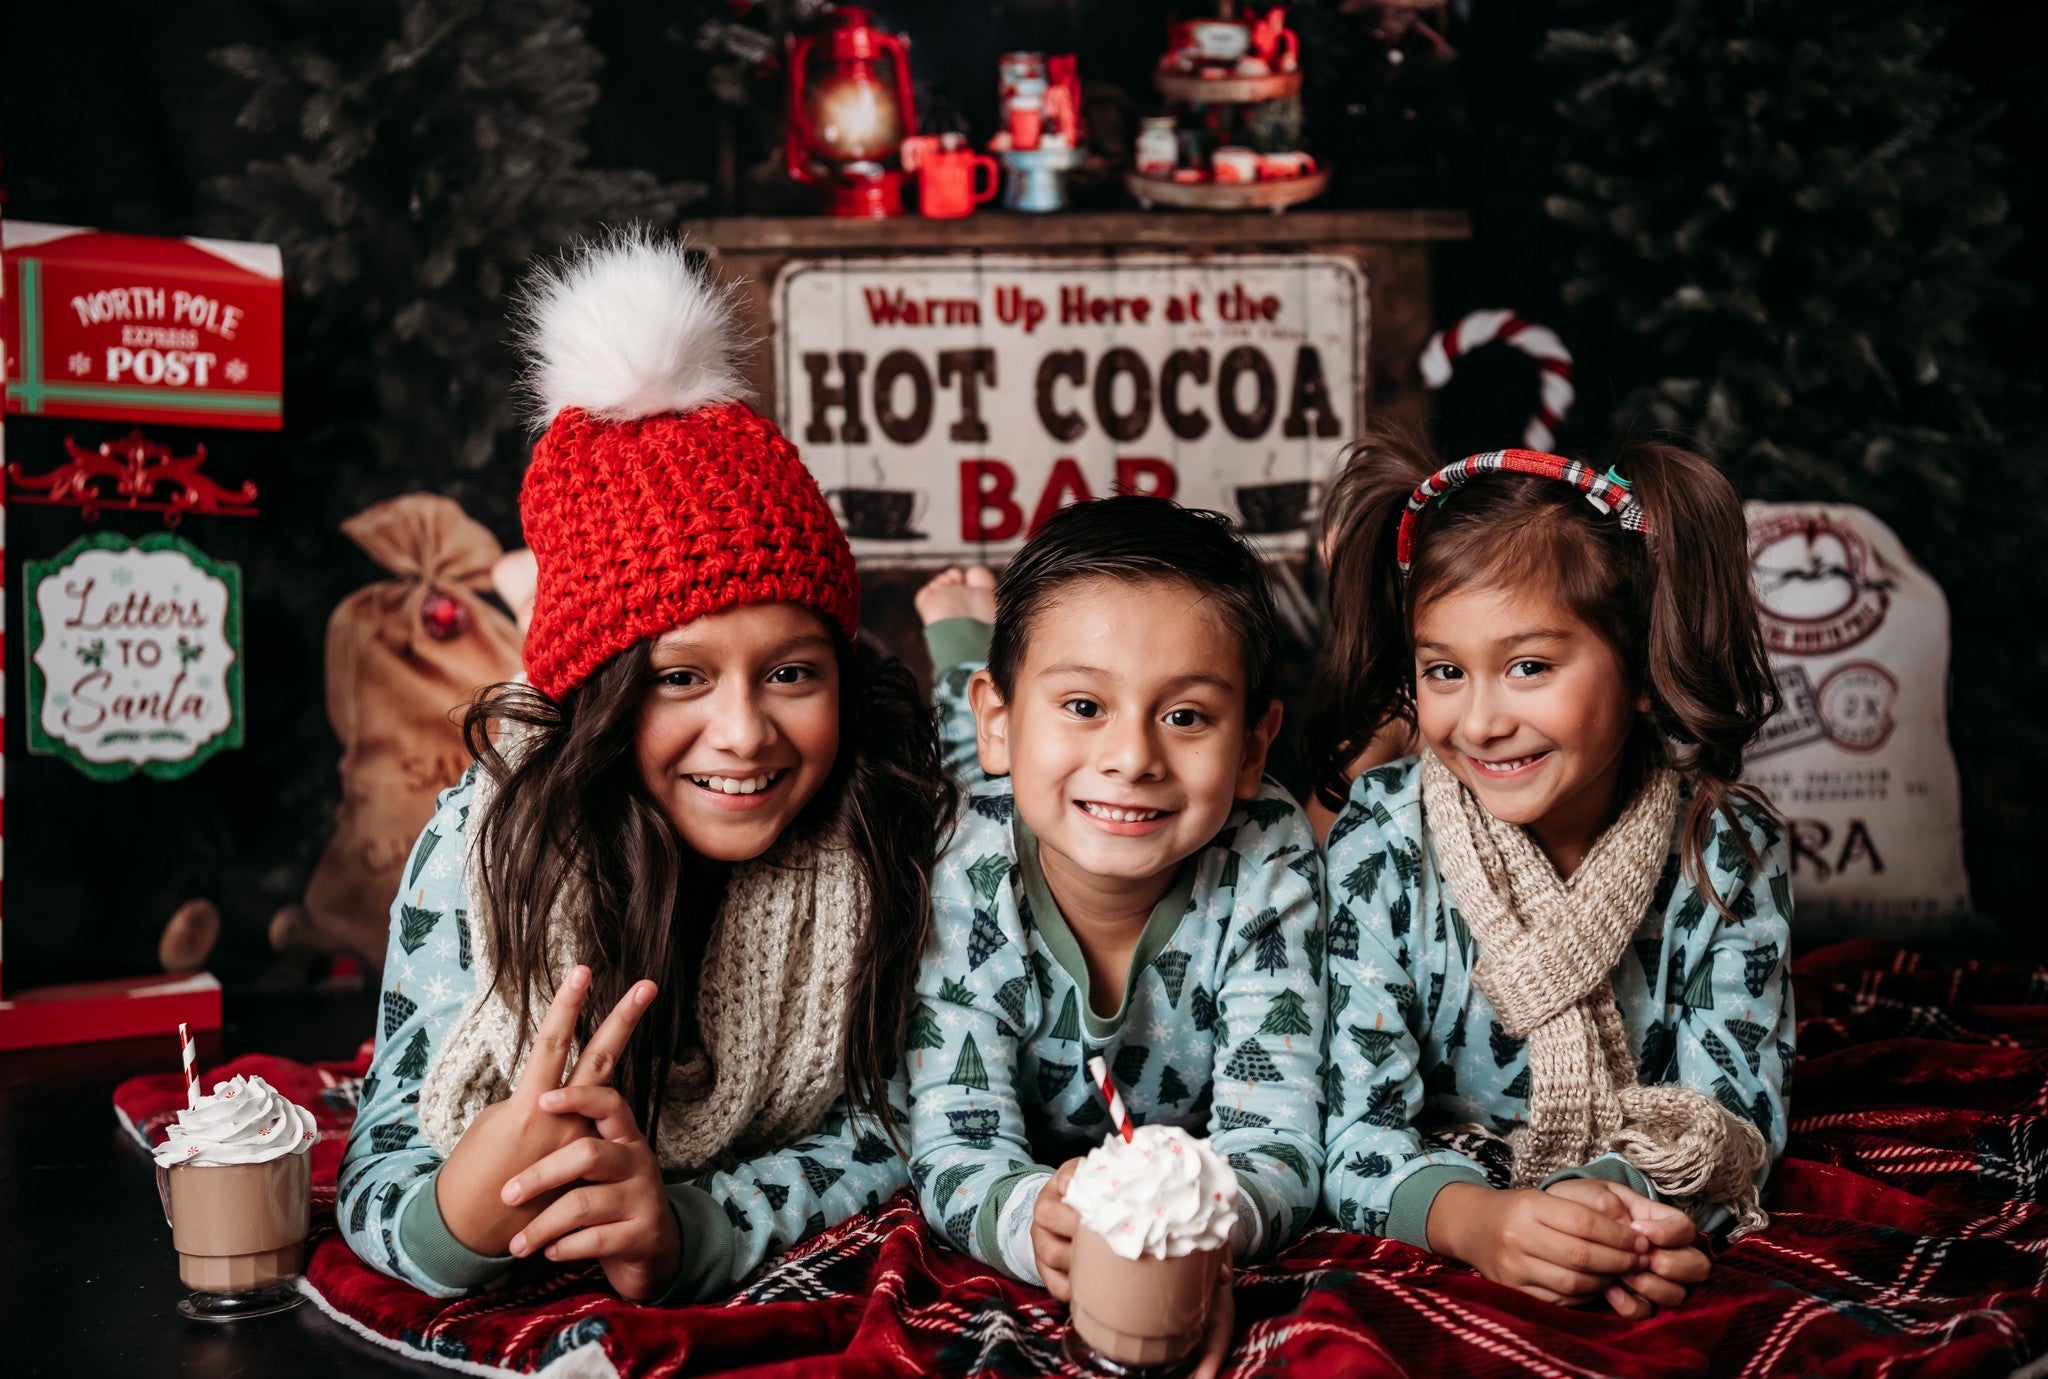 Kate Christmas Trees Hot Cocoa Party Backdrop for Photography